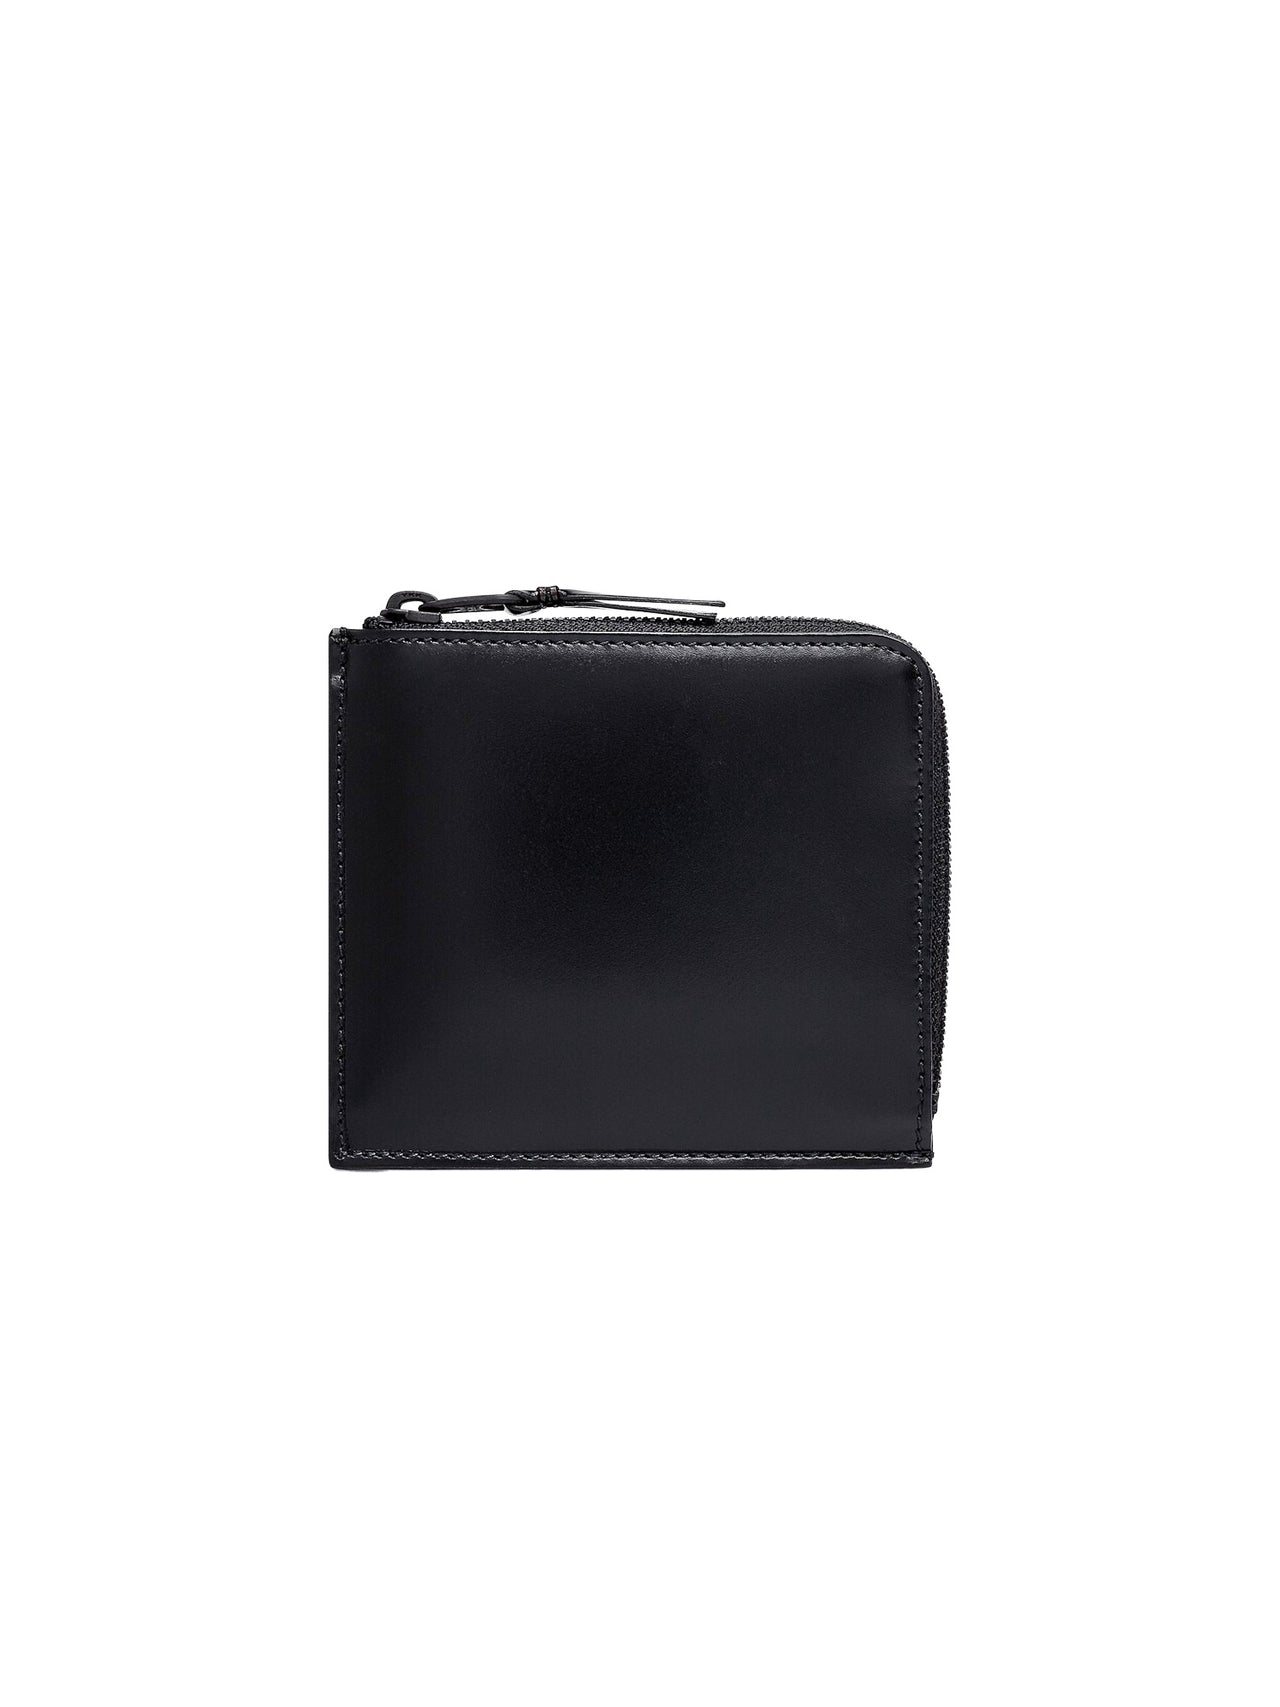 CdG Wallet / VERY BLACK LEATHER LINE COIN CASE(BLACK)